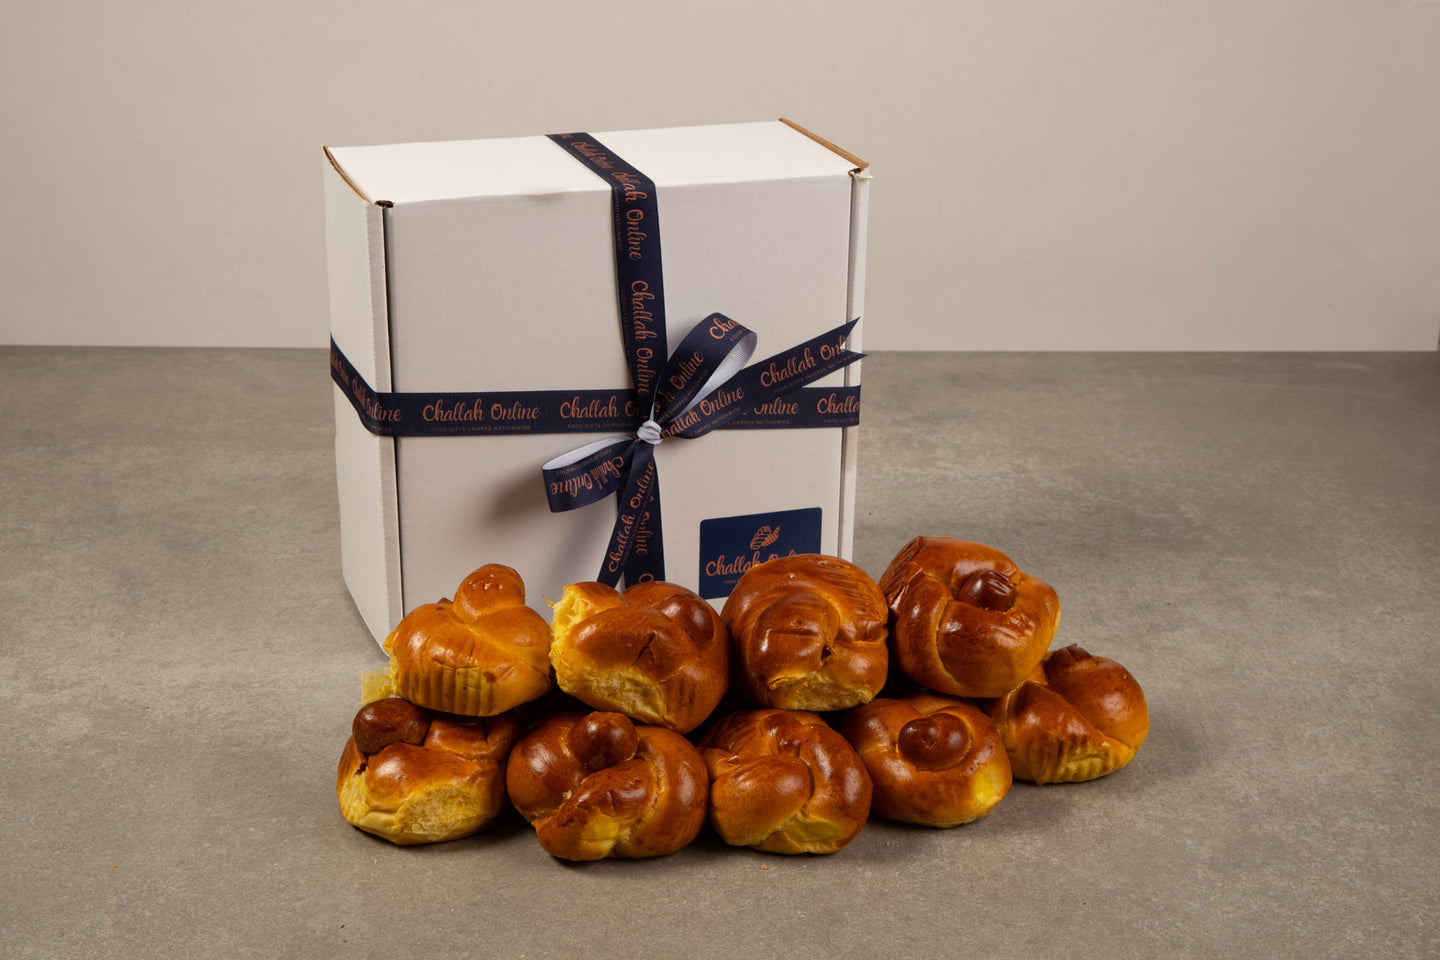 A Large Gift Box full of Challah Rolls 